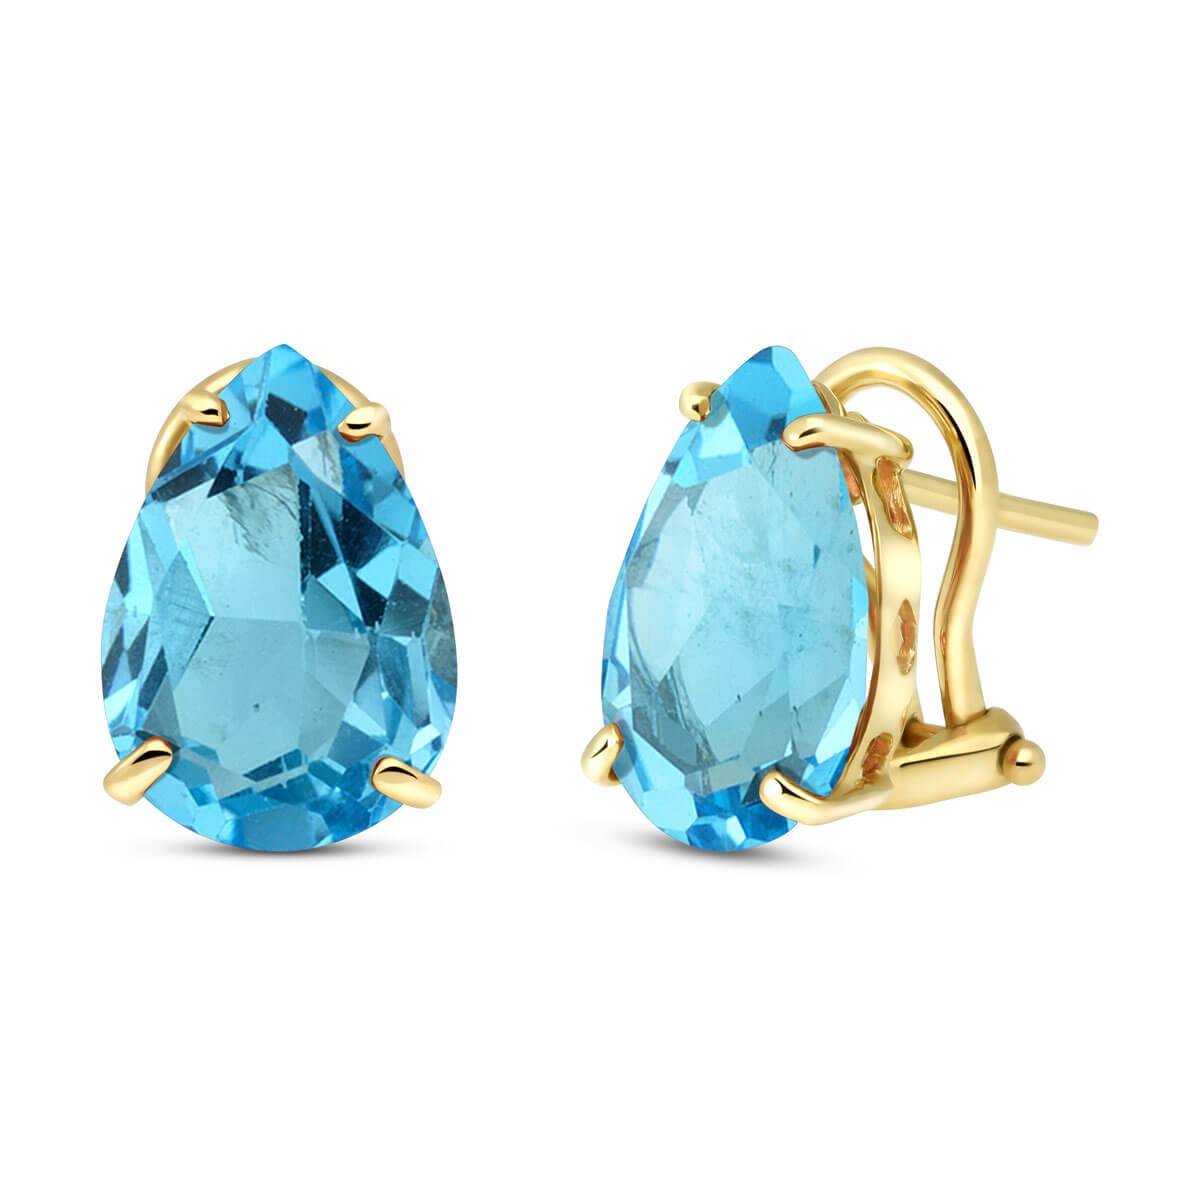 10 Carat 14K Solid Yellow Gold Inspiration Blue Topaz Earrings